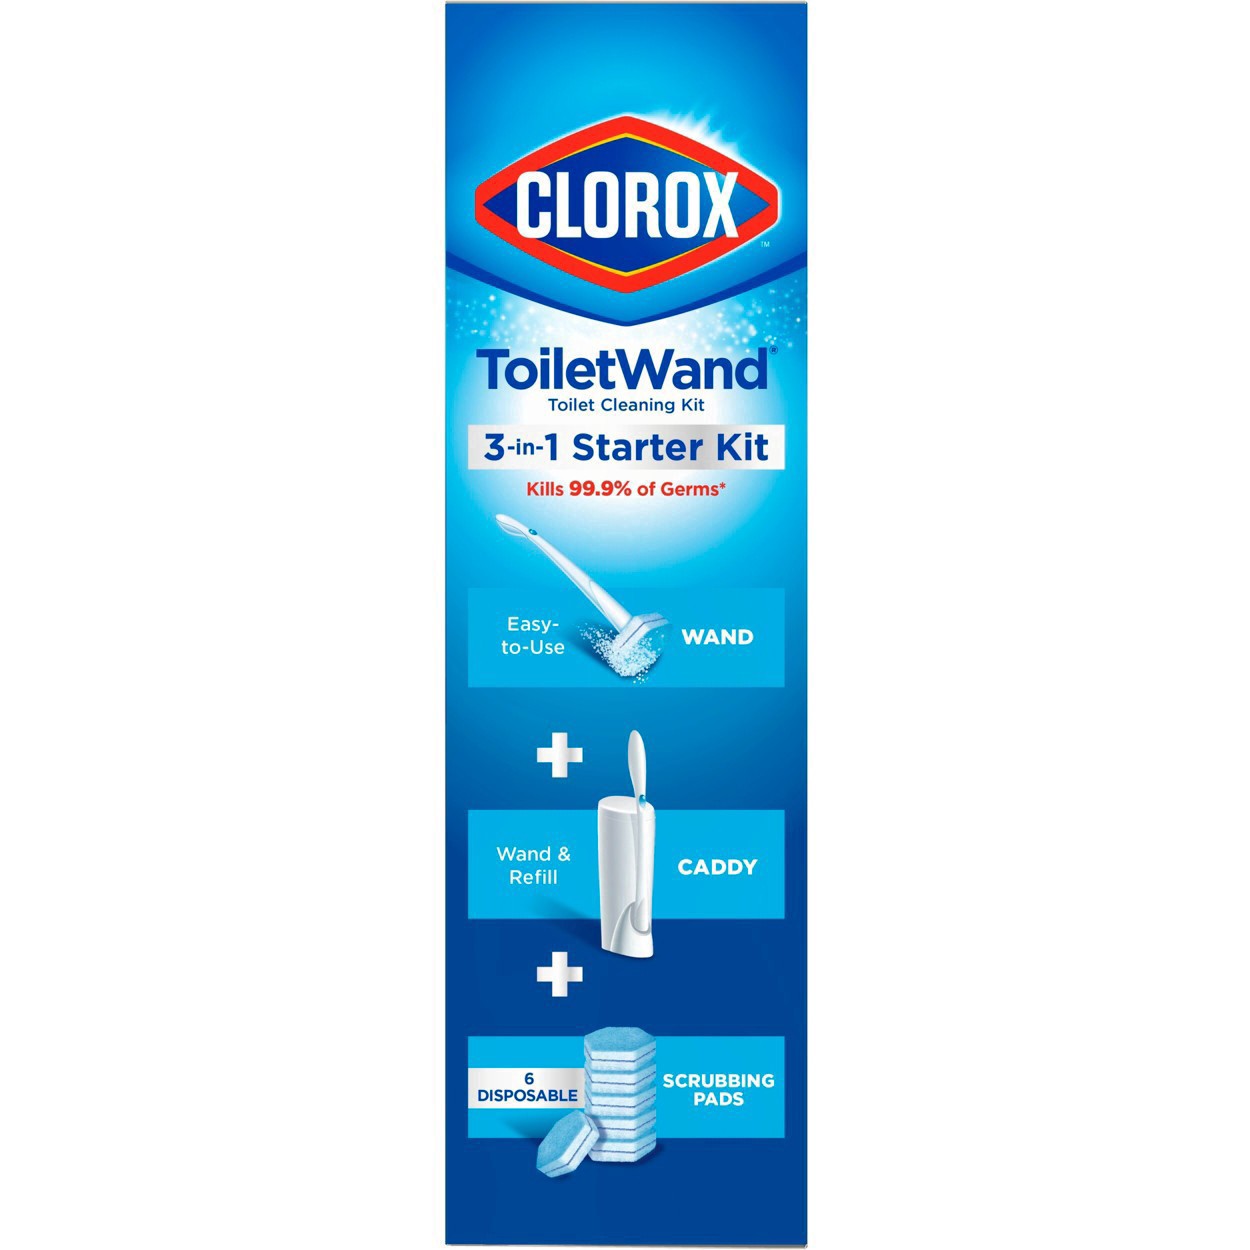 slide 10 of 176, Clorox Toilet Wand 3-in-1 Starter Toliet Cleaning Kit, 1 ct